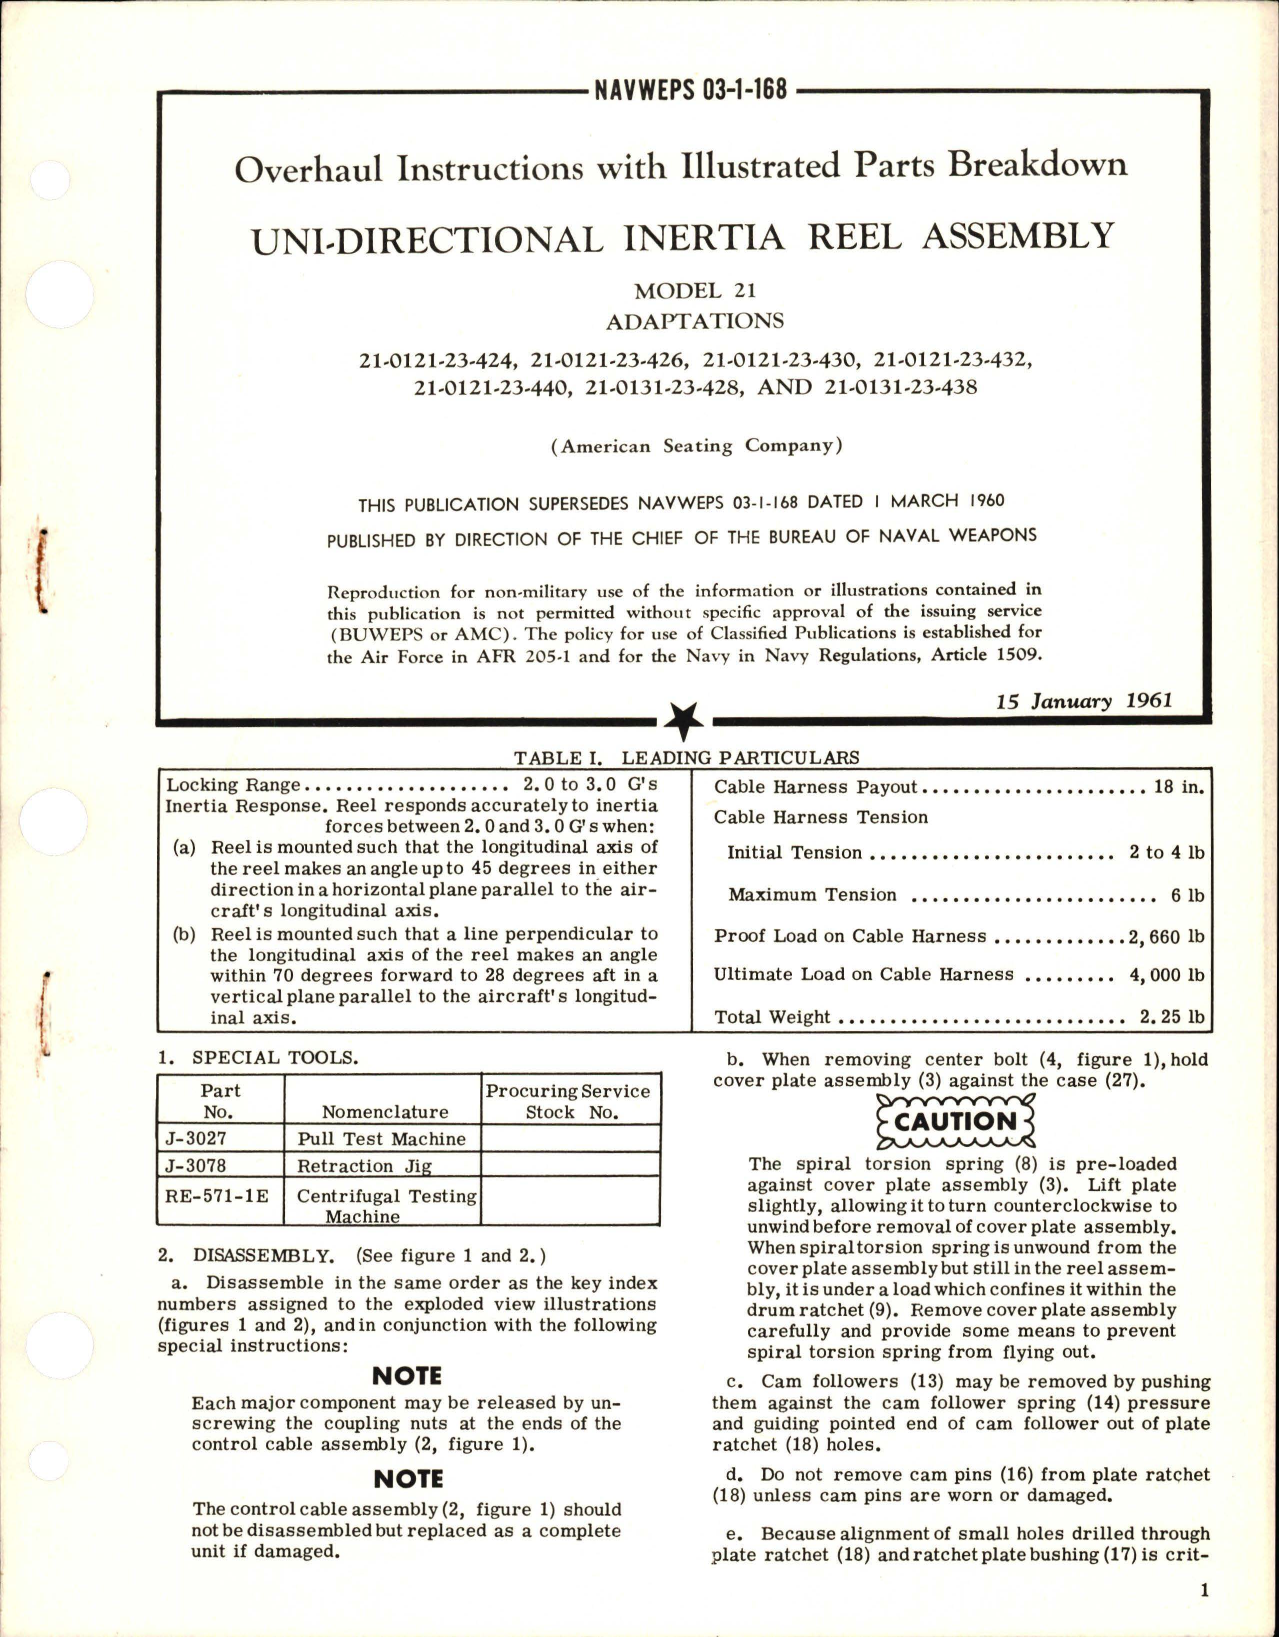 Sample page 1 from AirCorps Library document: Overhaul Instructions with Illustrated Parts Breakdown for Uni-Directional Inertia Reel Assembly - Model 21